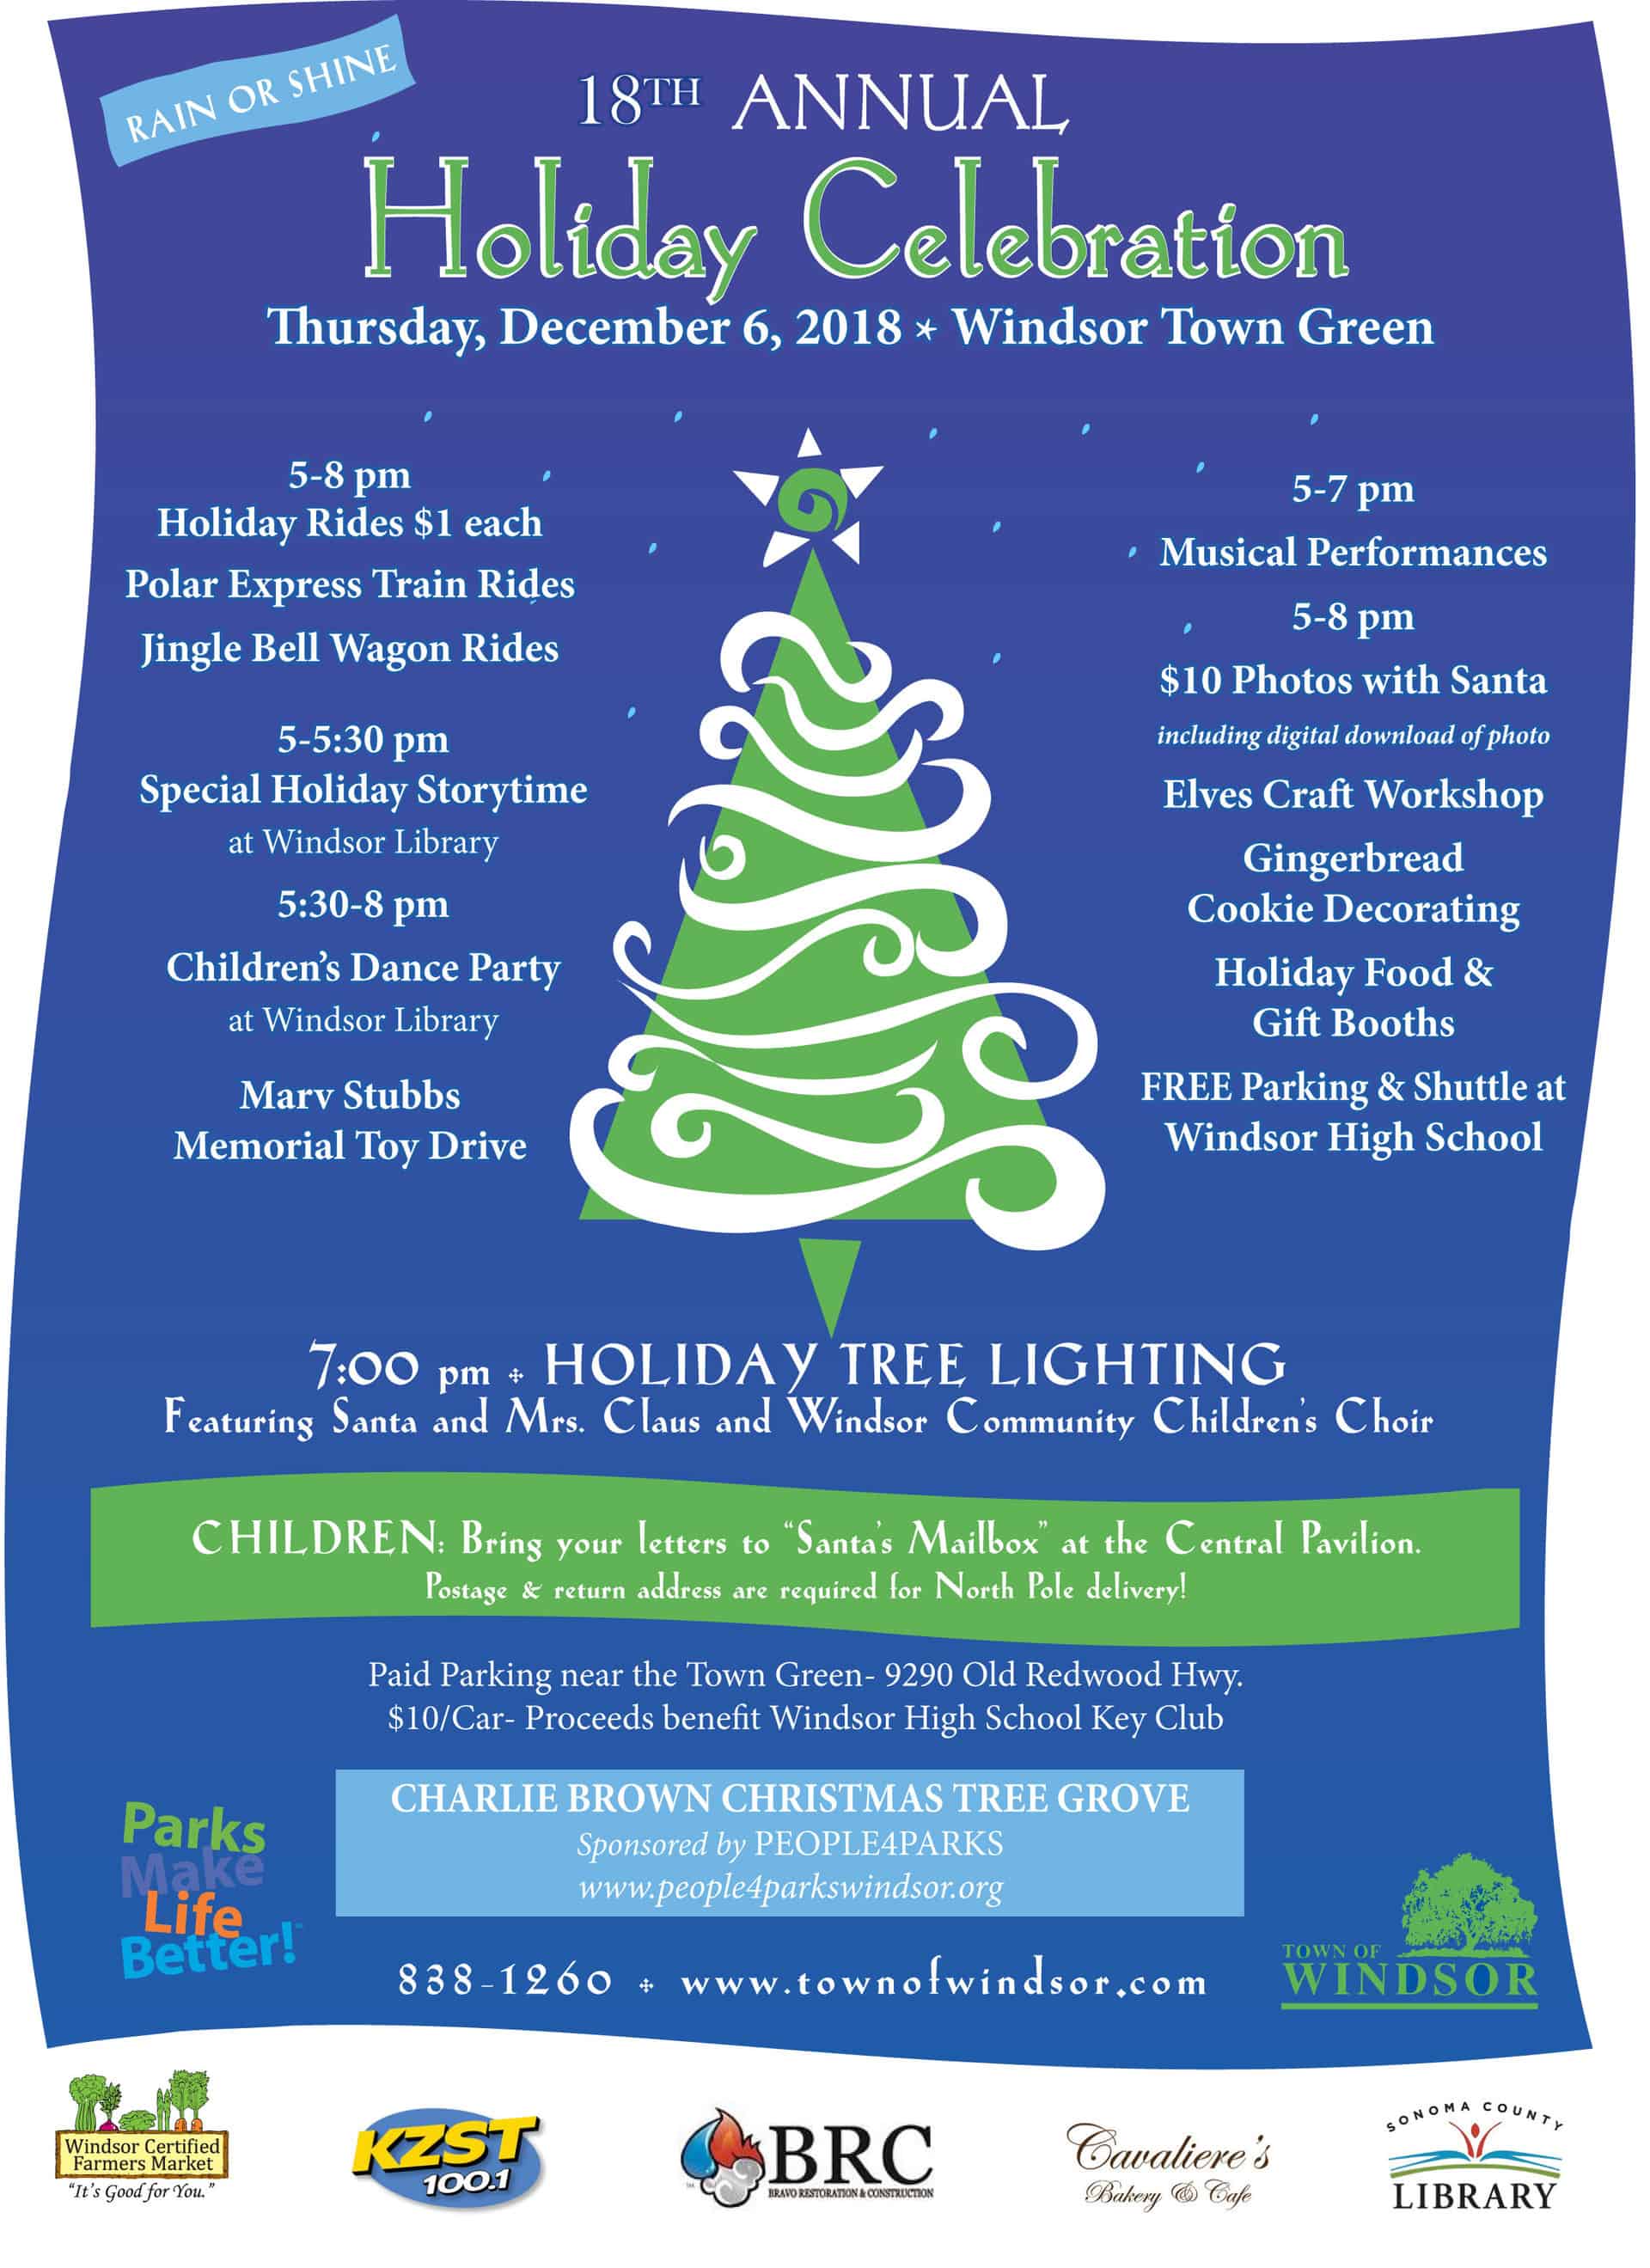 18th Annual Windsor Holiday Celebration